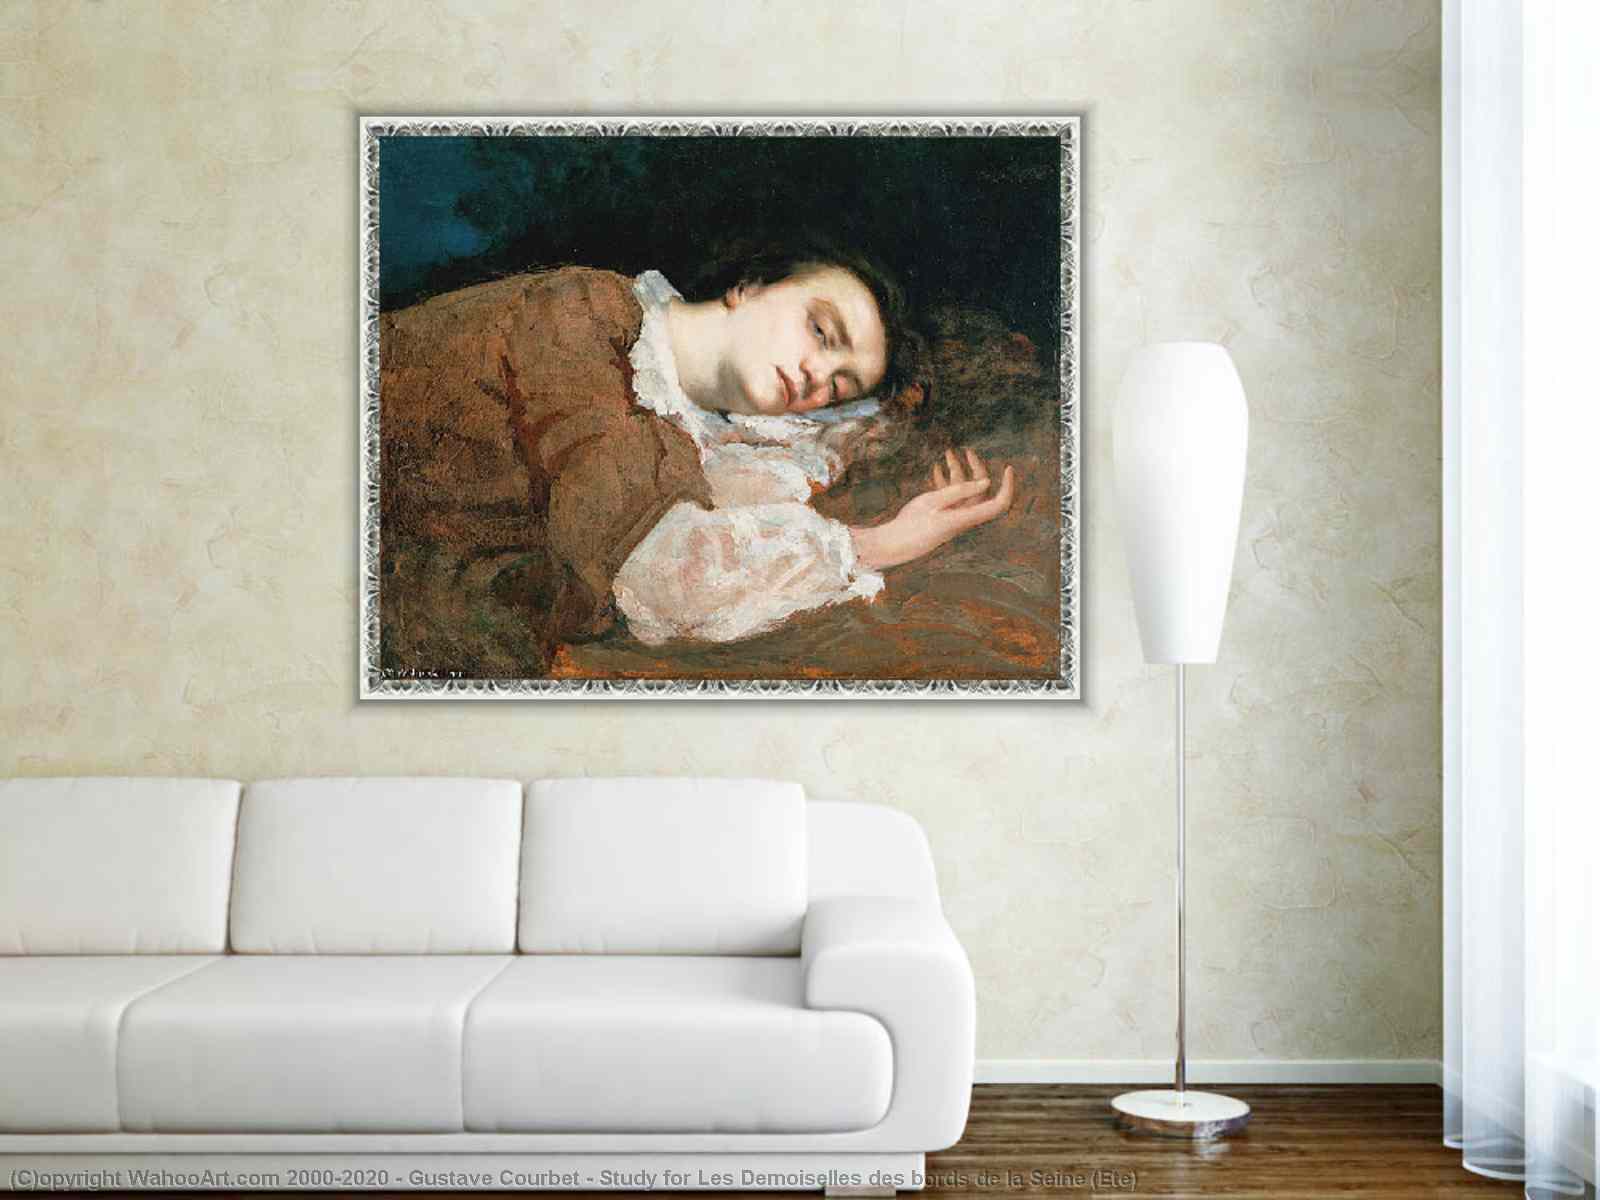 L'Immensite - Gustave Courbet as art print or hand painted oil.